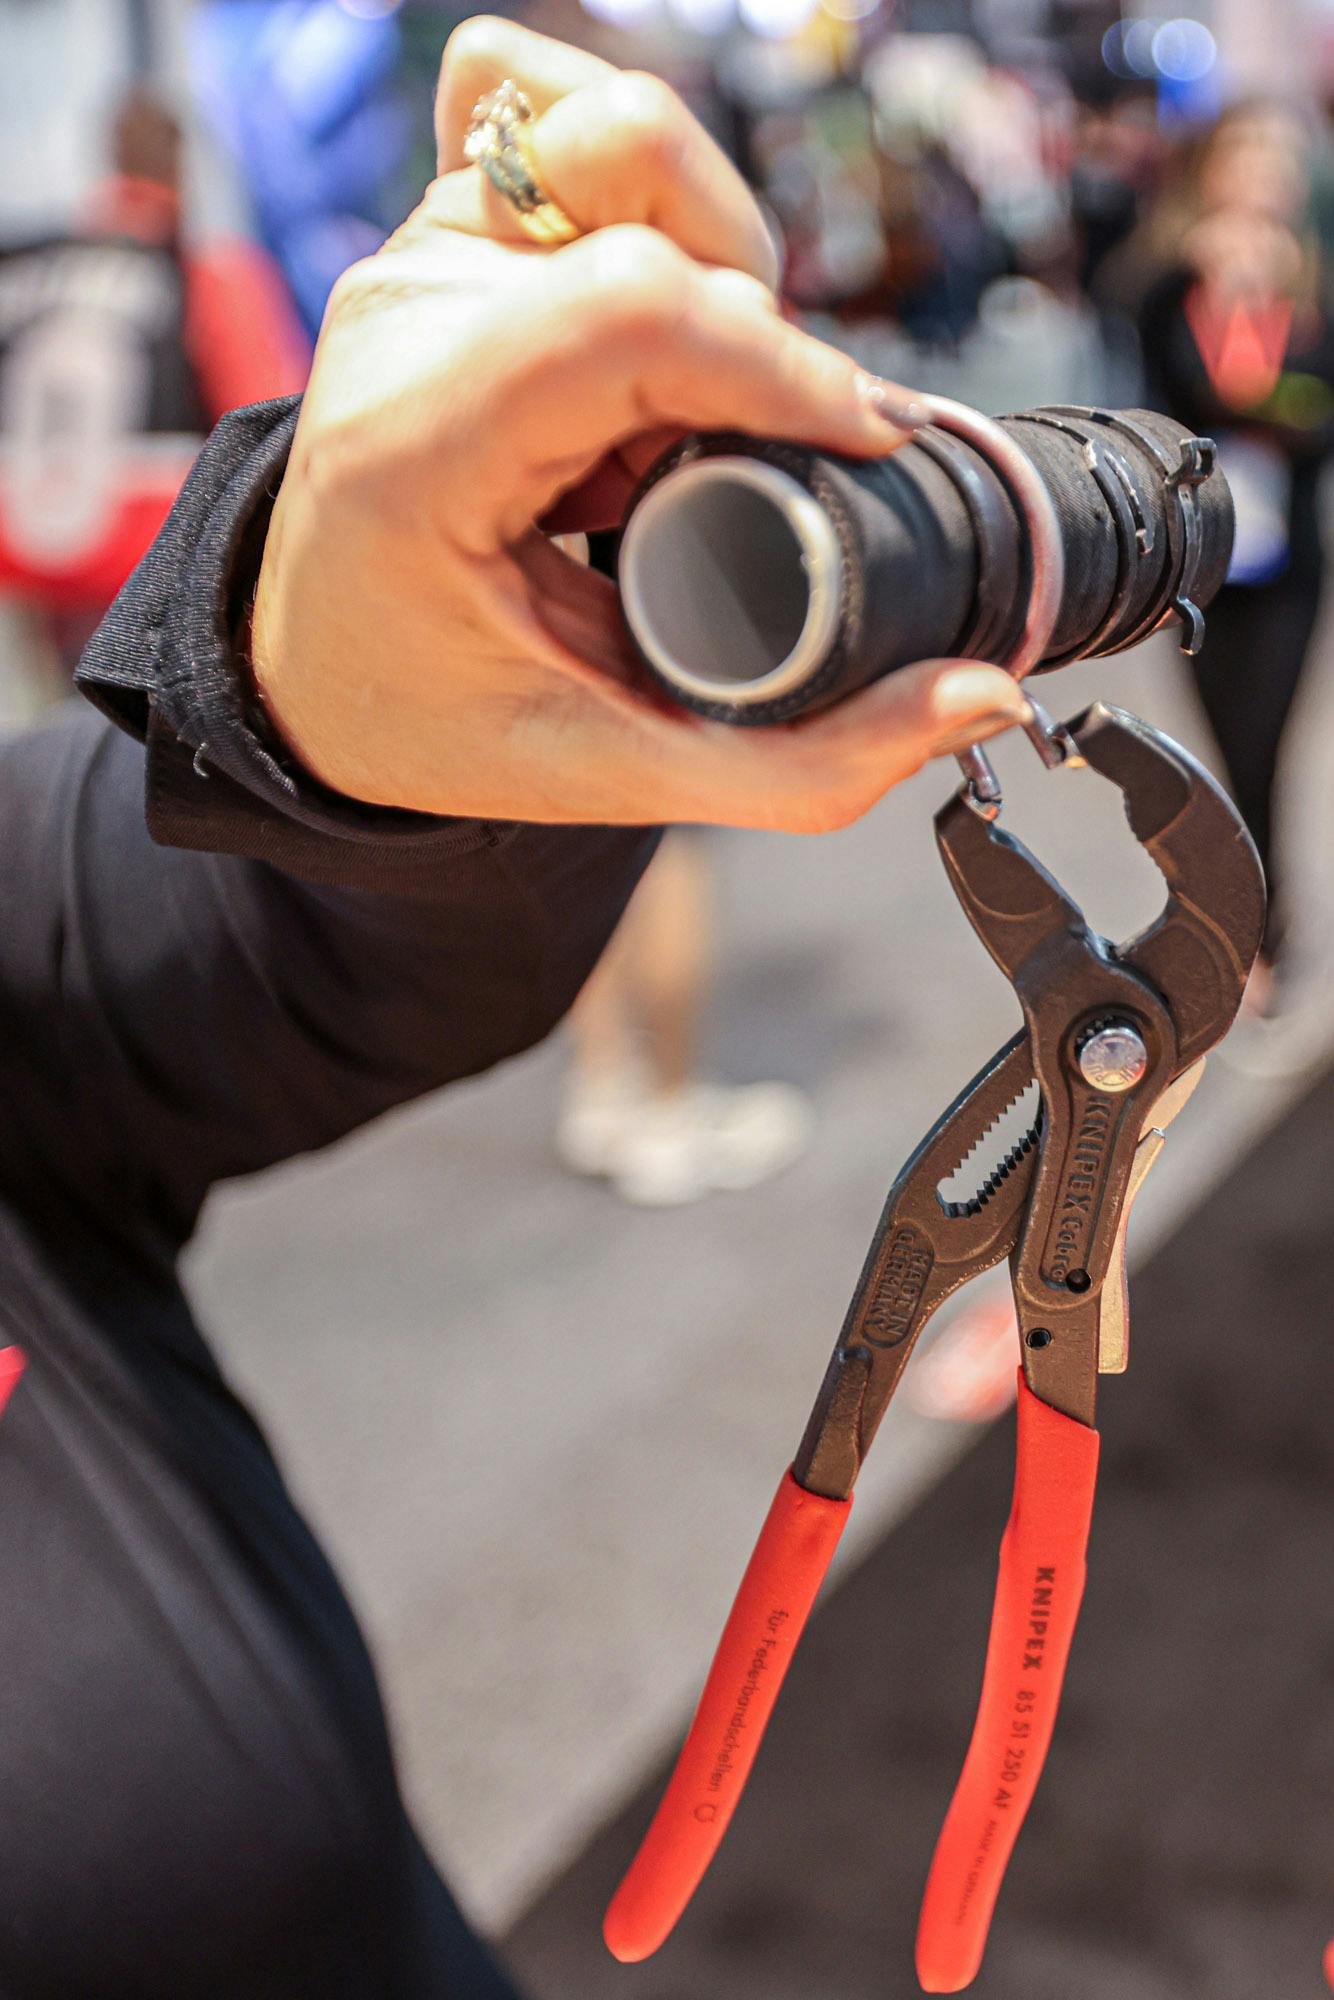 Knipex spring hose clamp pliers tool